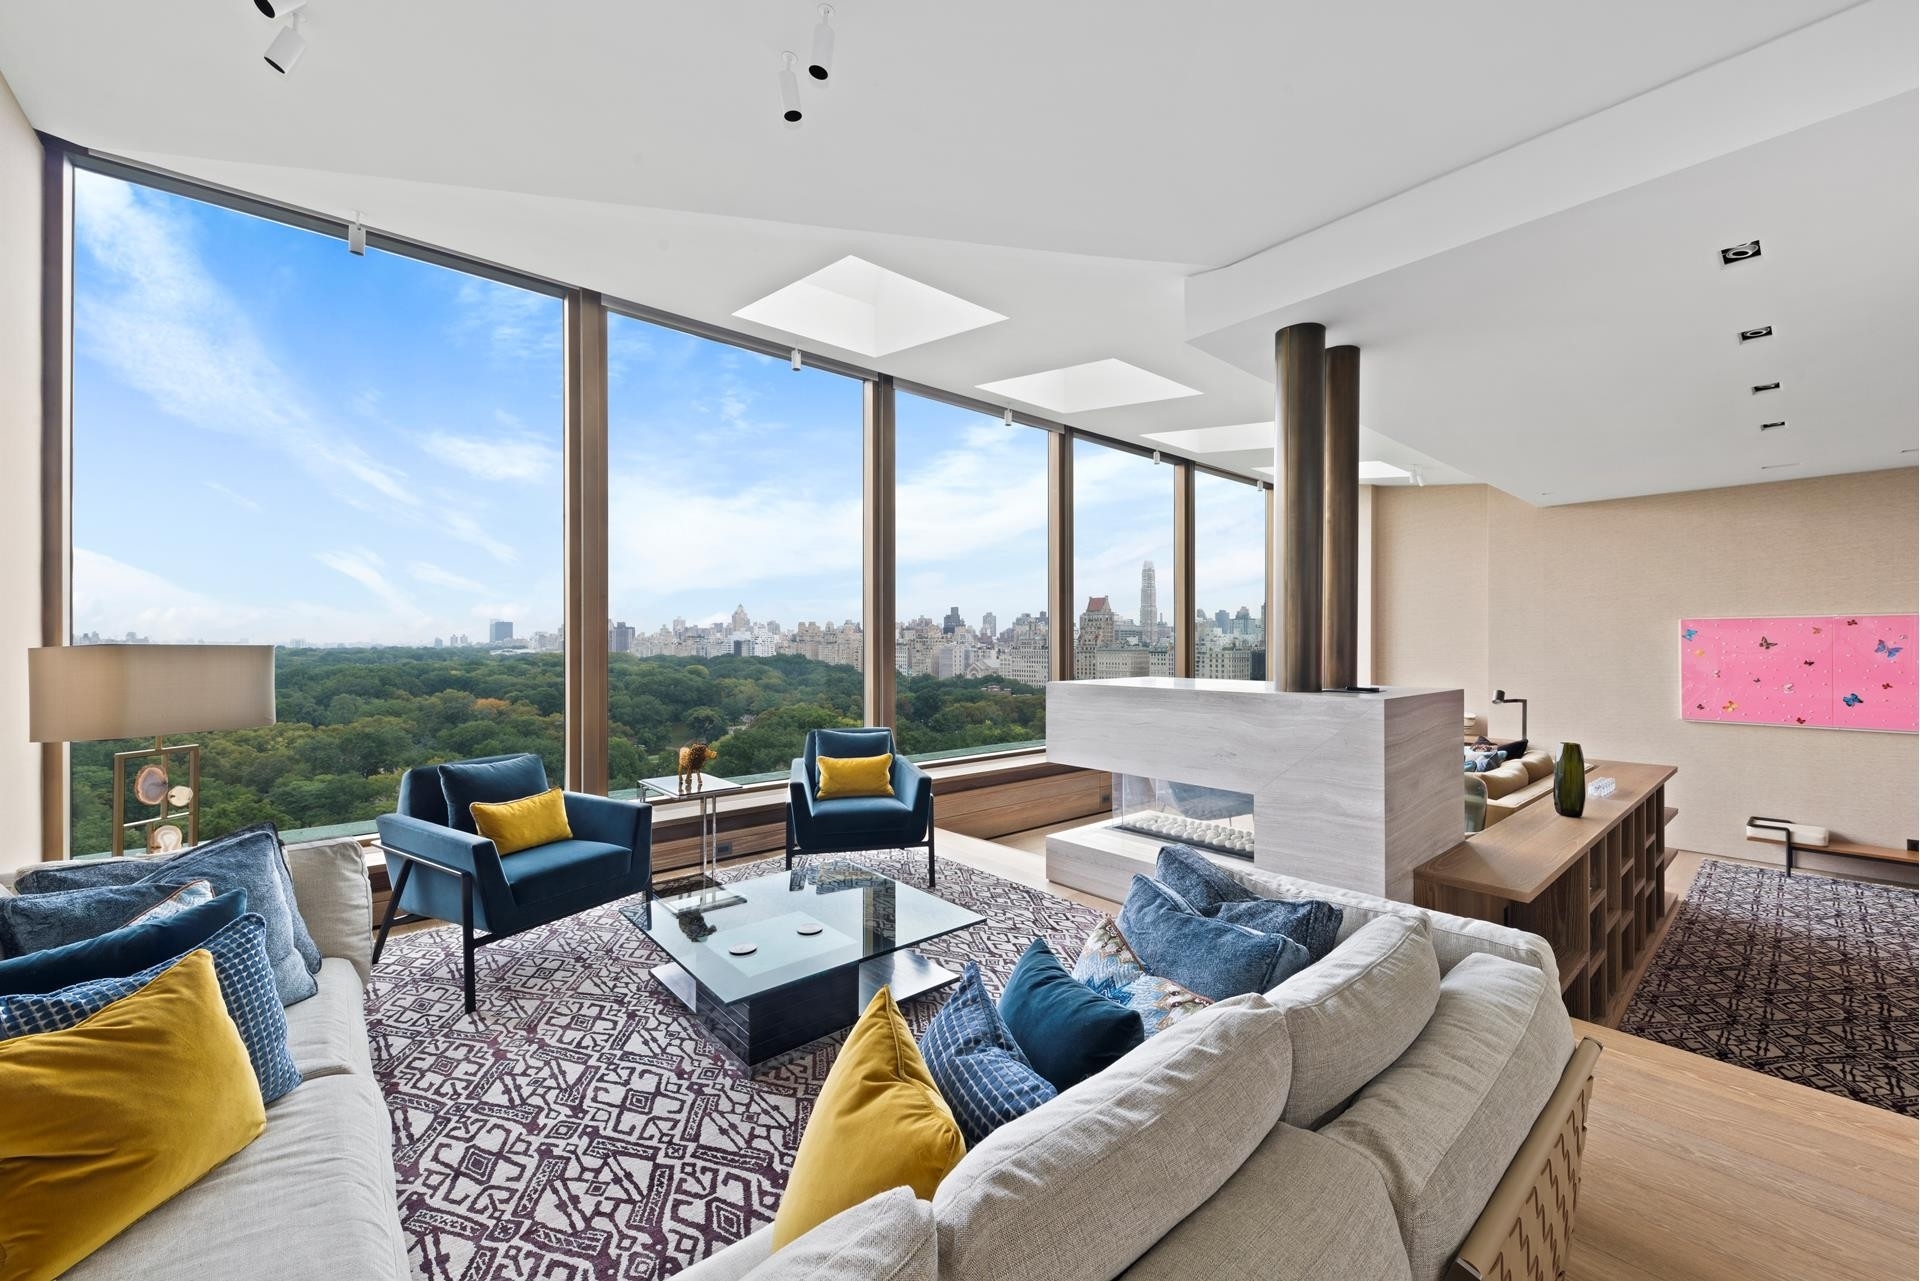 Property at 128 CENTRAL PARK S, PH/15A Central Park South, New York, New York 10019